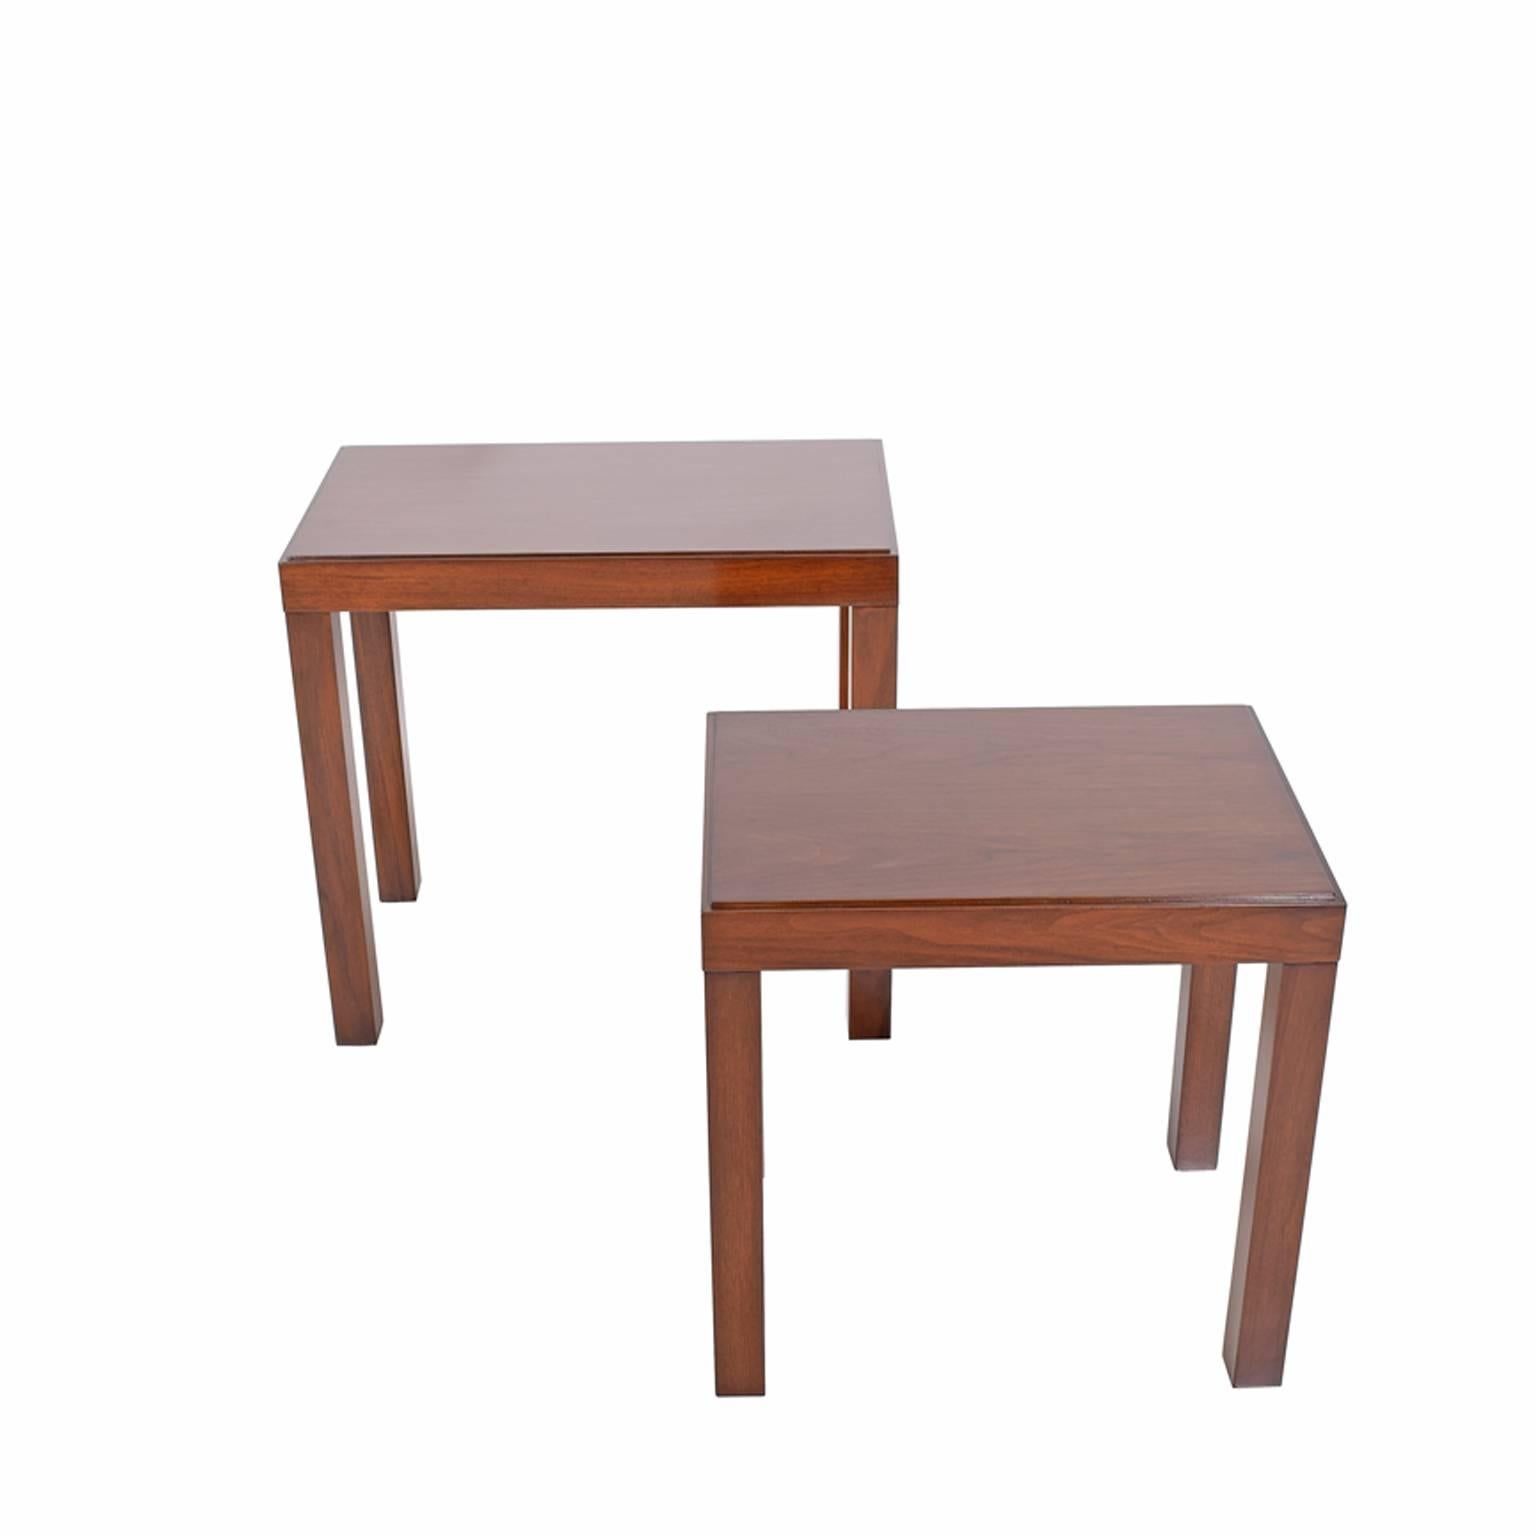 Modern Nesting Tables by George Nelson for Herman Miller #635/6